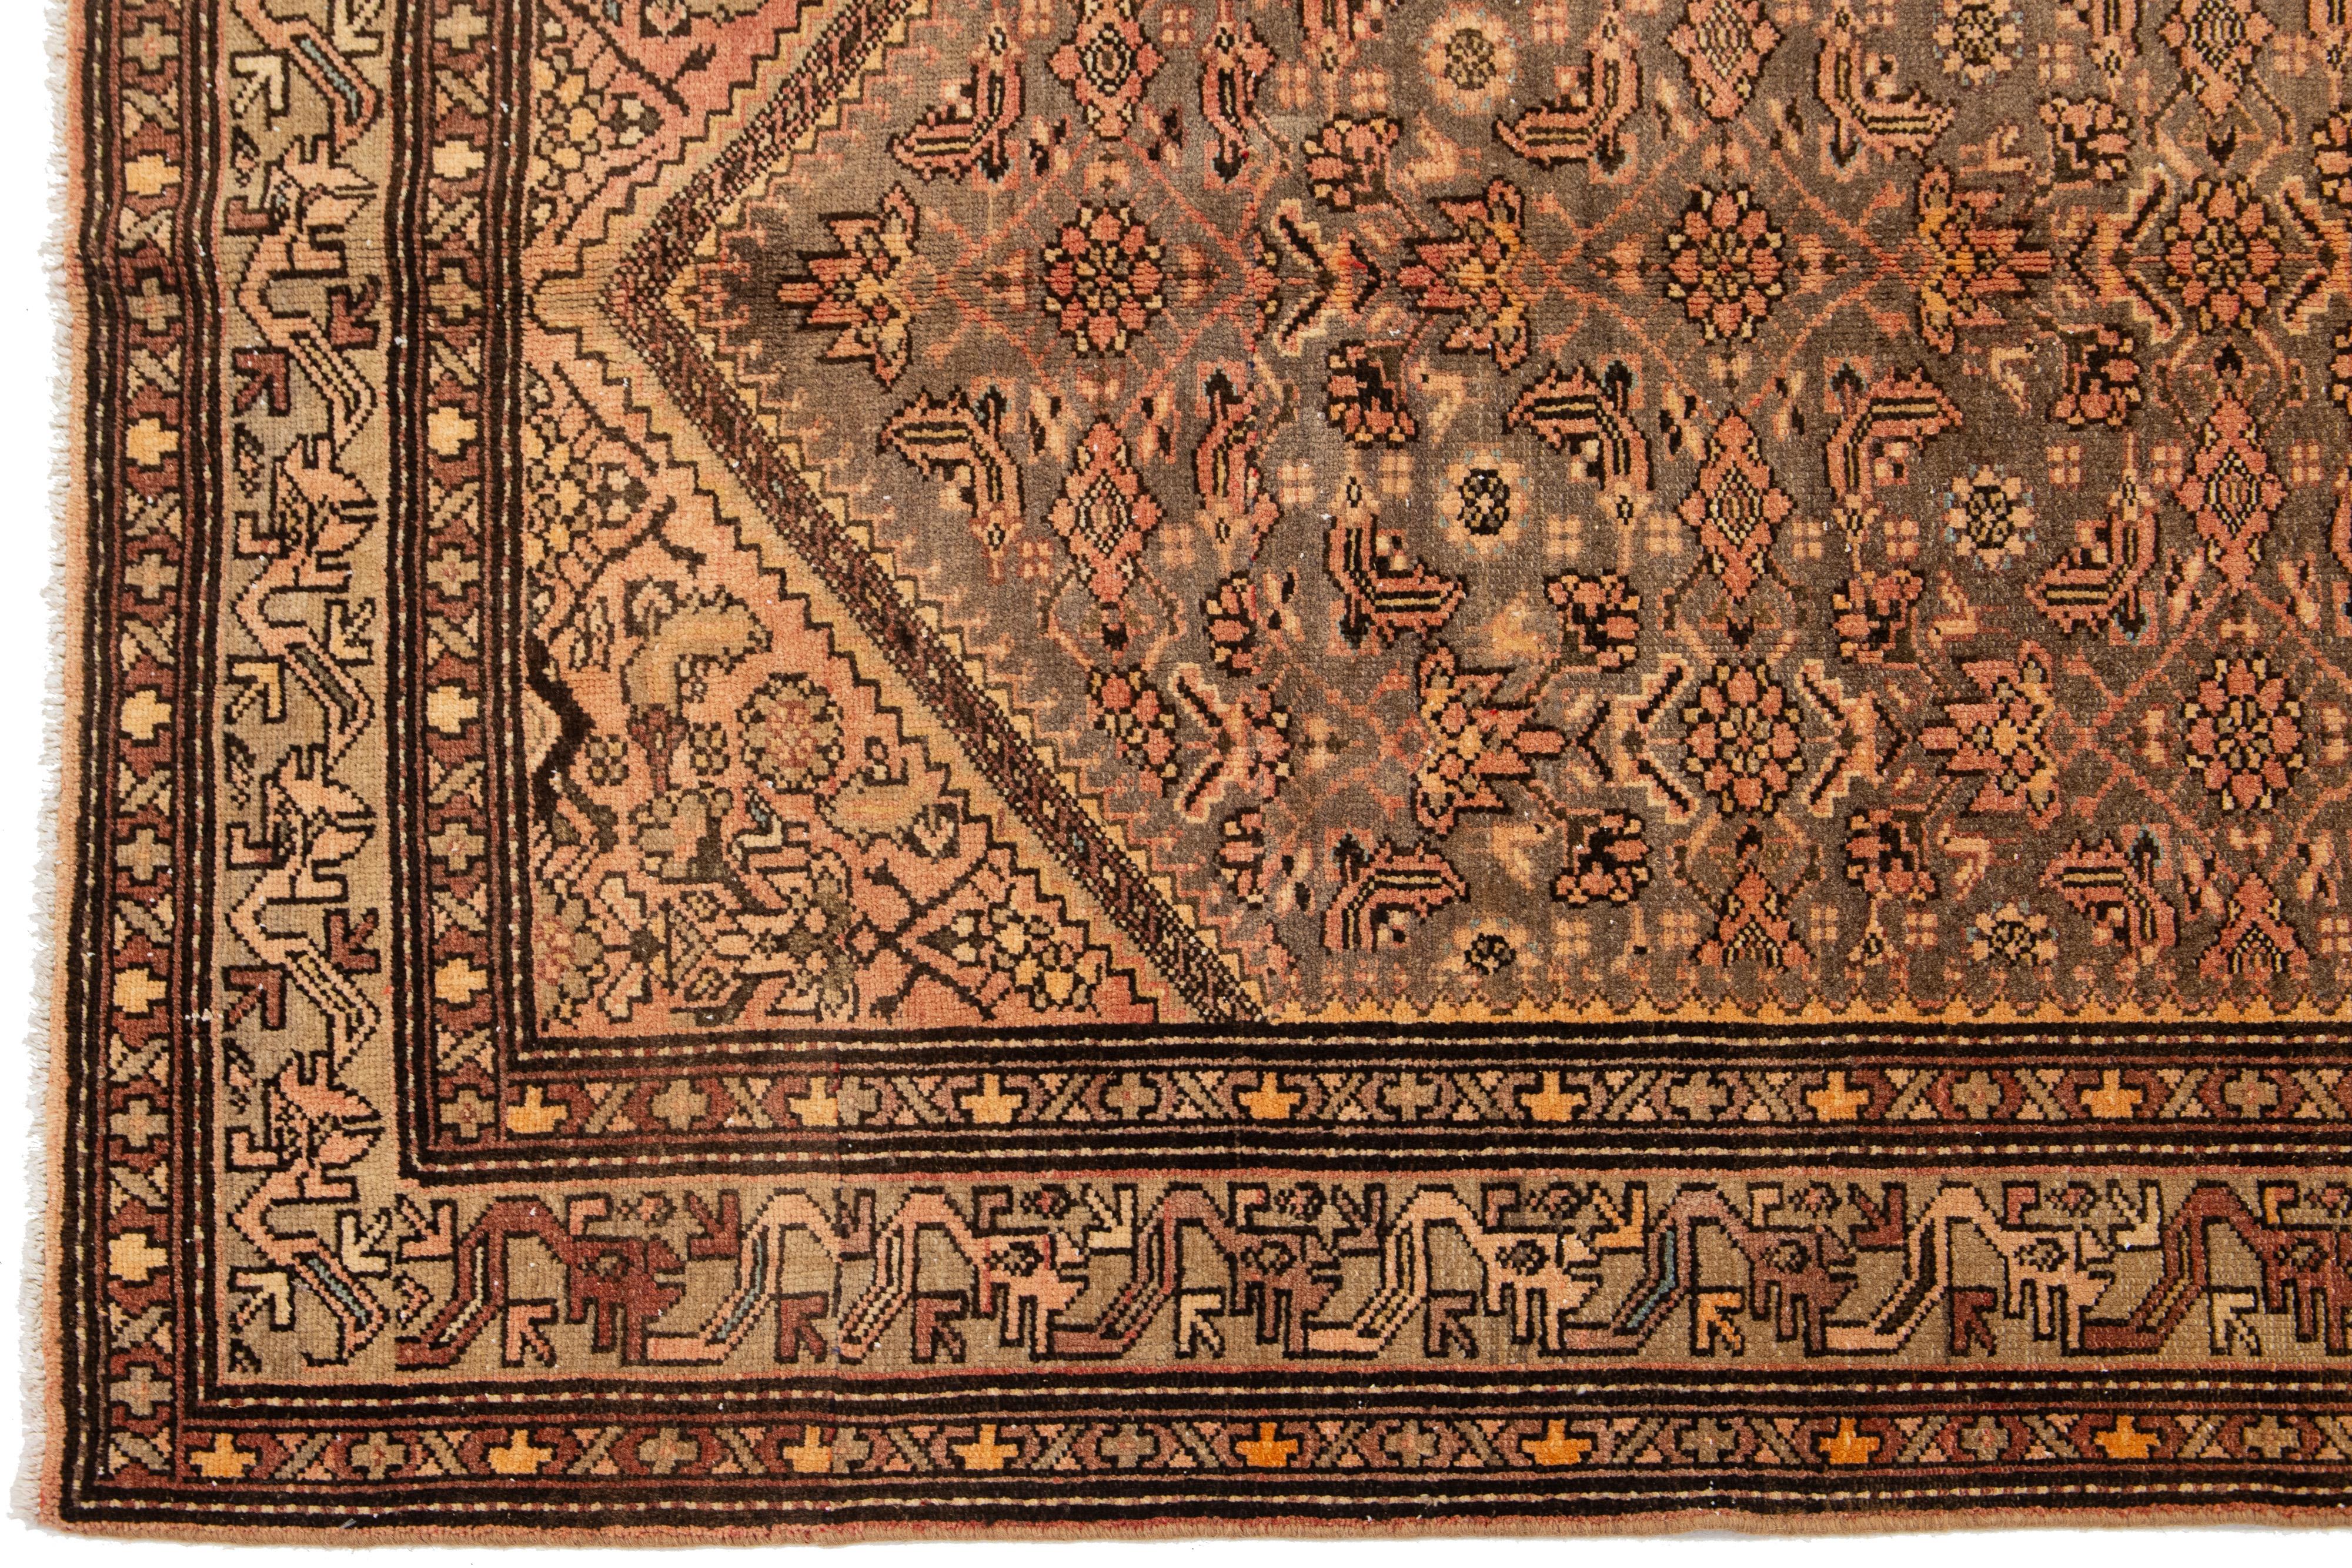 20th Century Antique Persian Malayer Gray Wool Rug From the 1920s with Floral Pattern For Sale